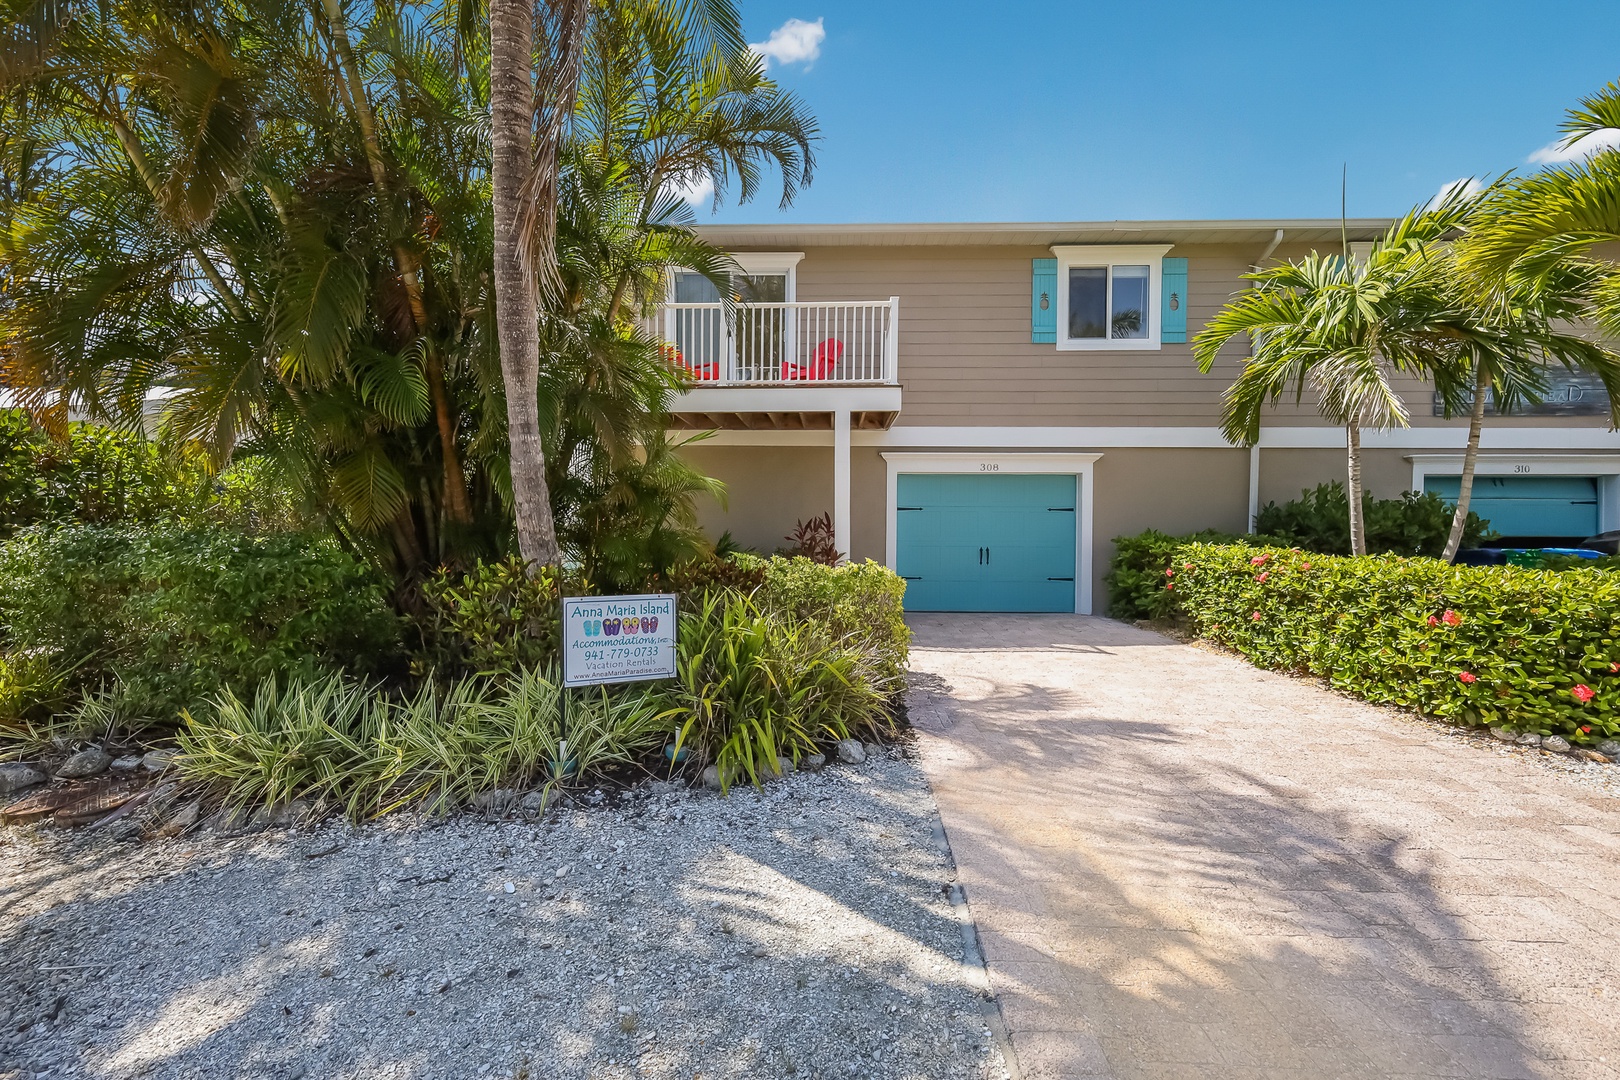 Pineapple Palms - By Anna Maria Island Accommodations